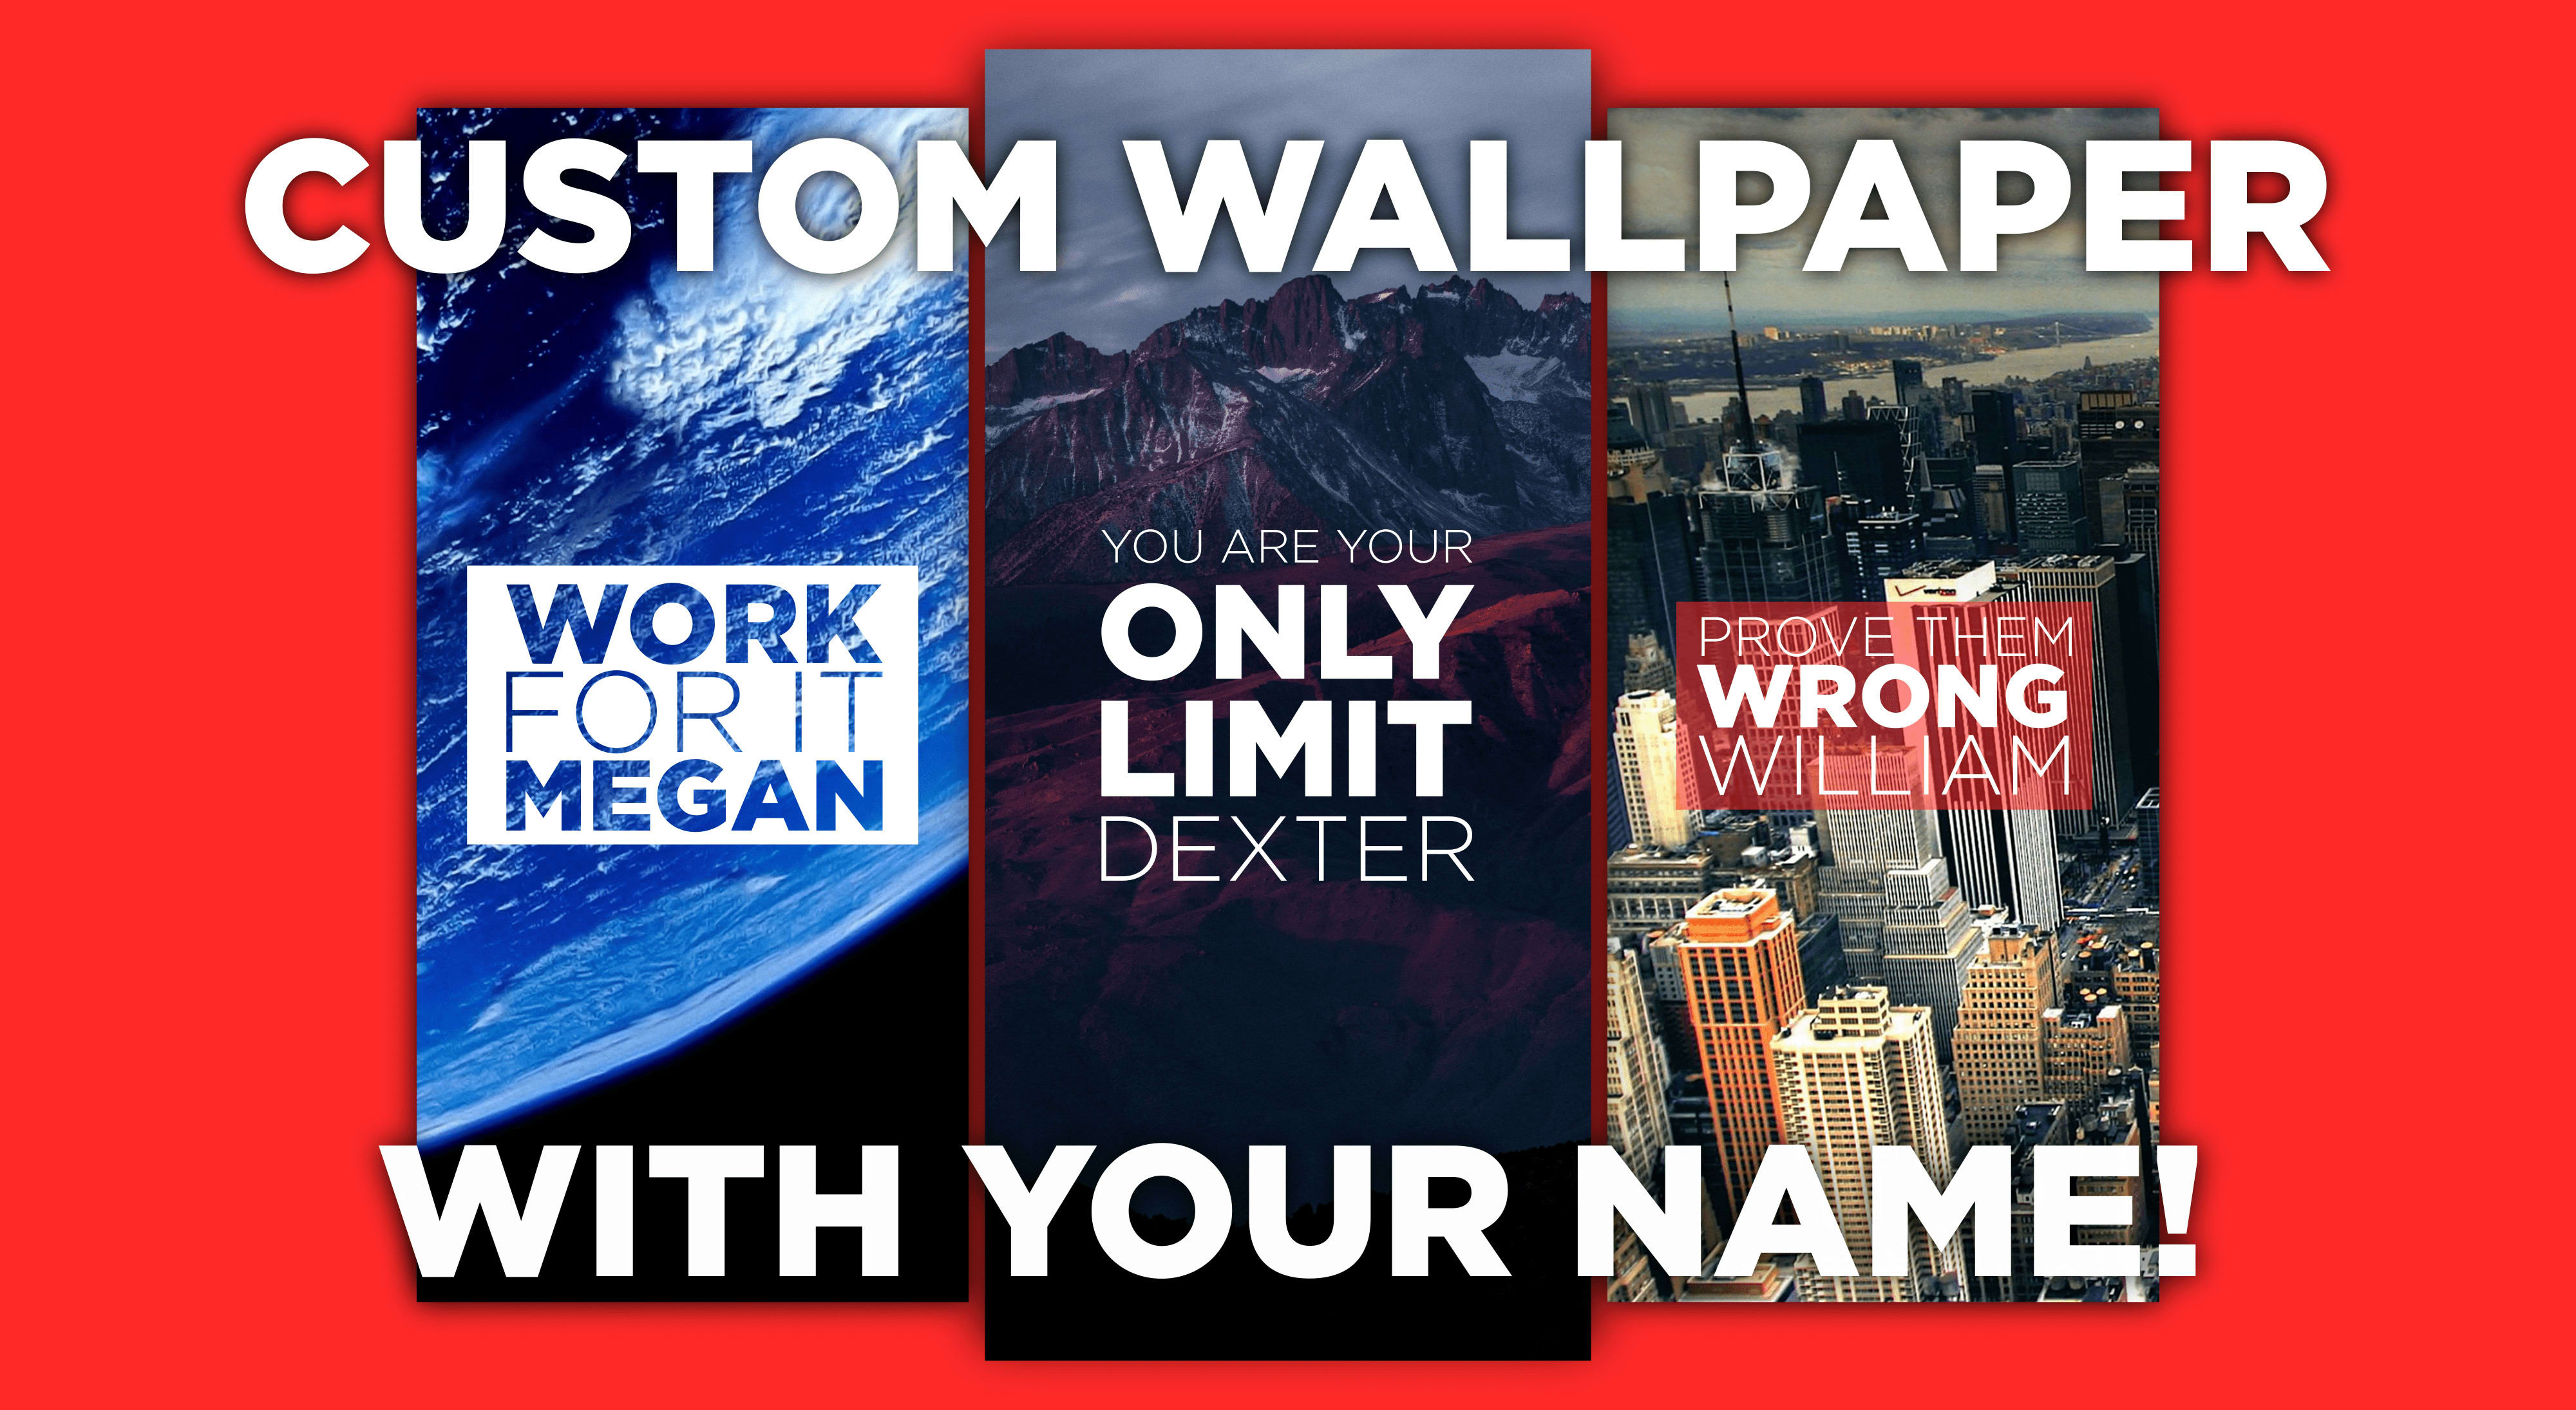 Create custom motivational wallpaper with your name by Croozer6 | Fiverr